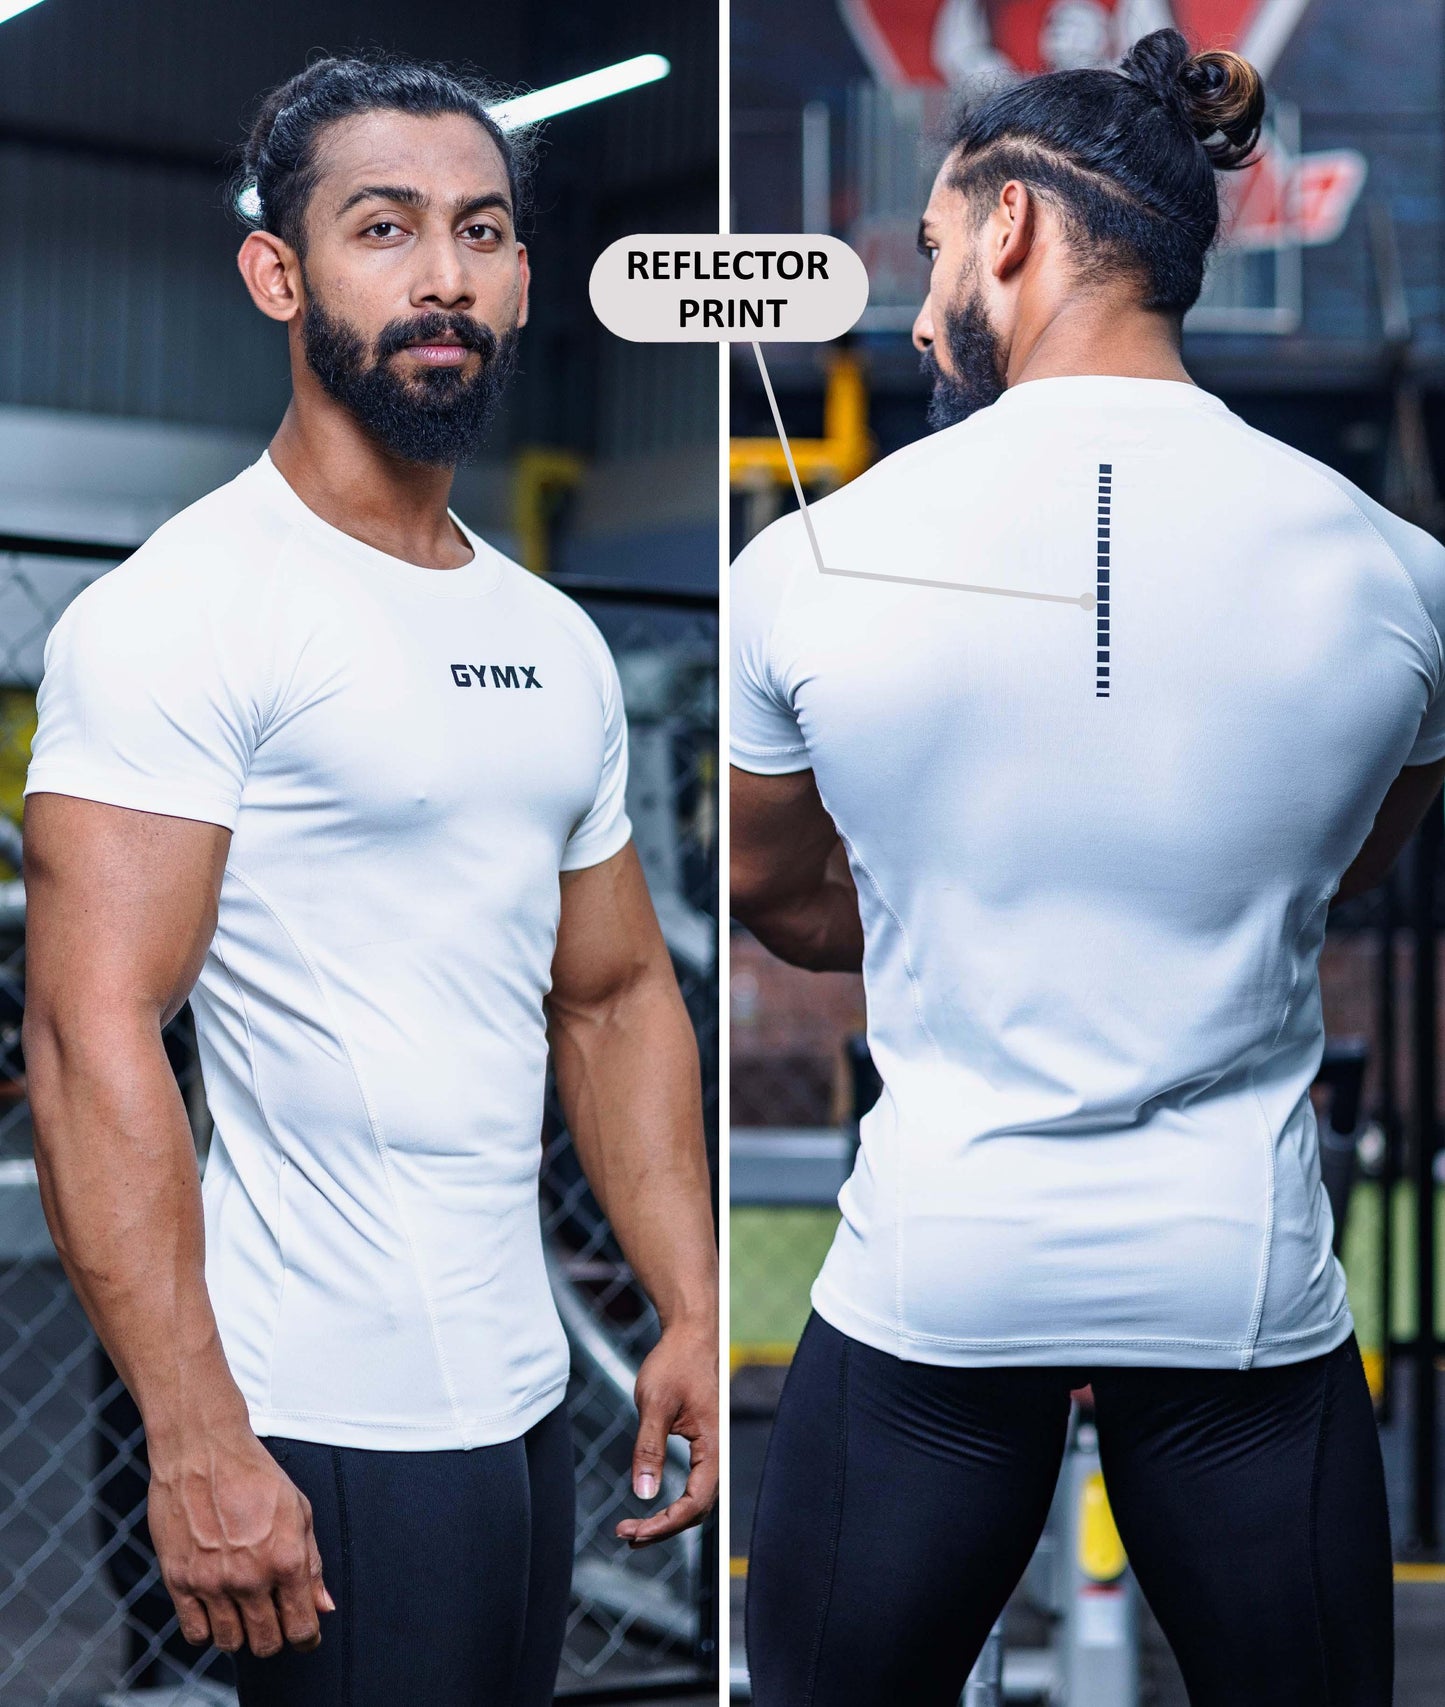 Viking Pro GymX Compression Tee: Frost White